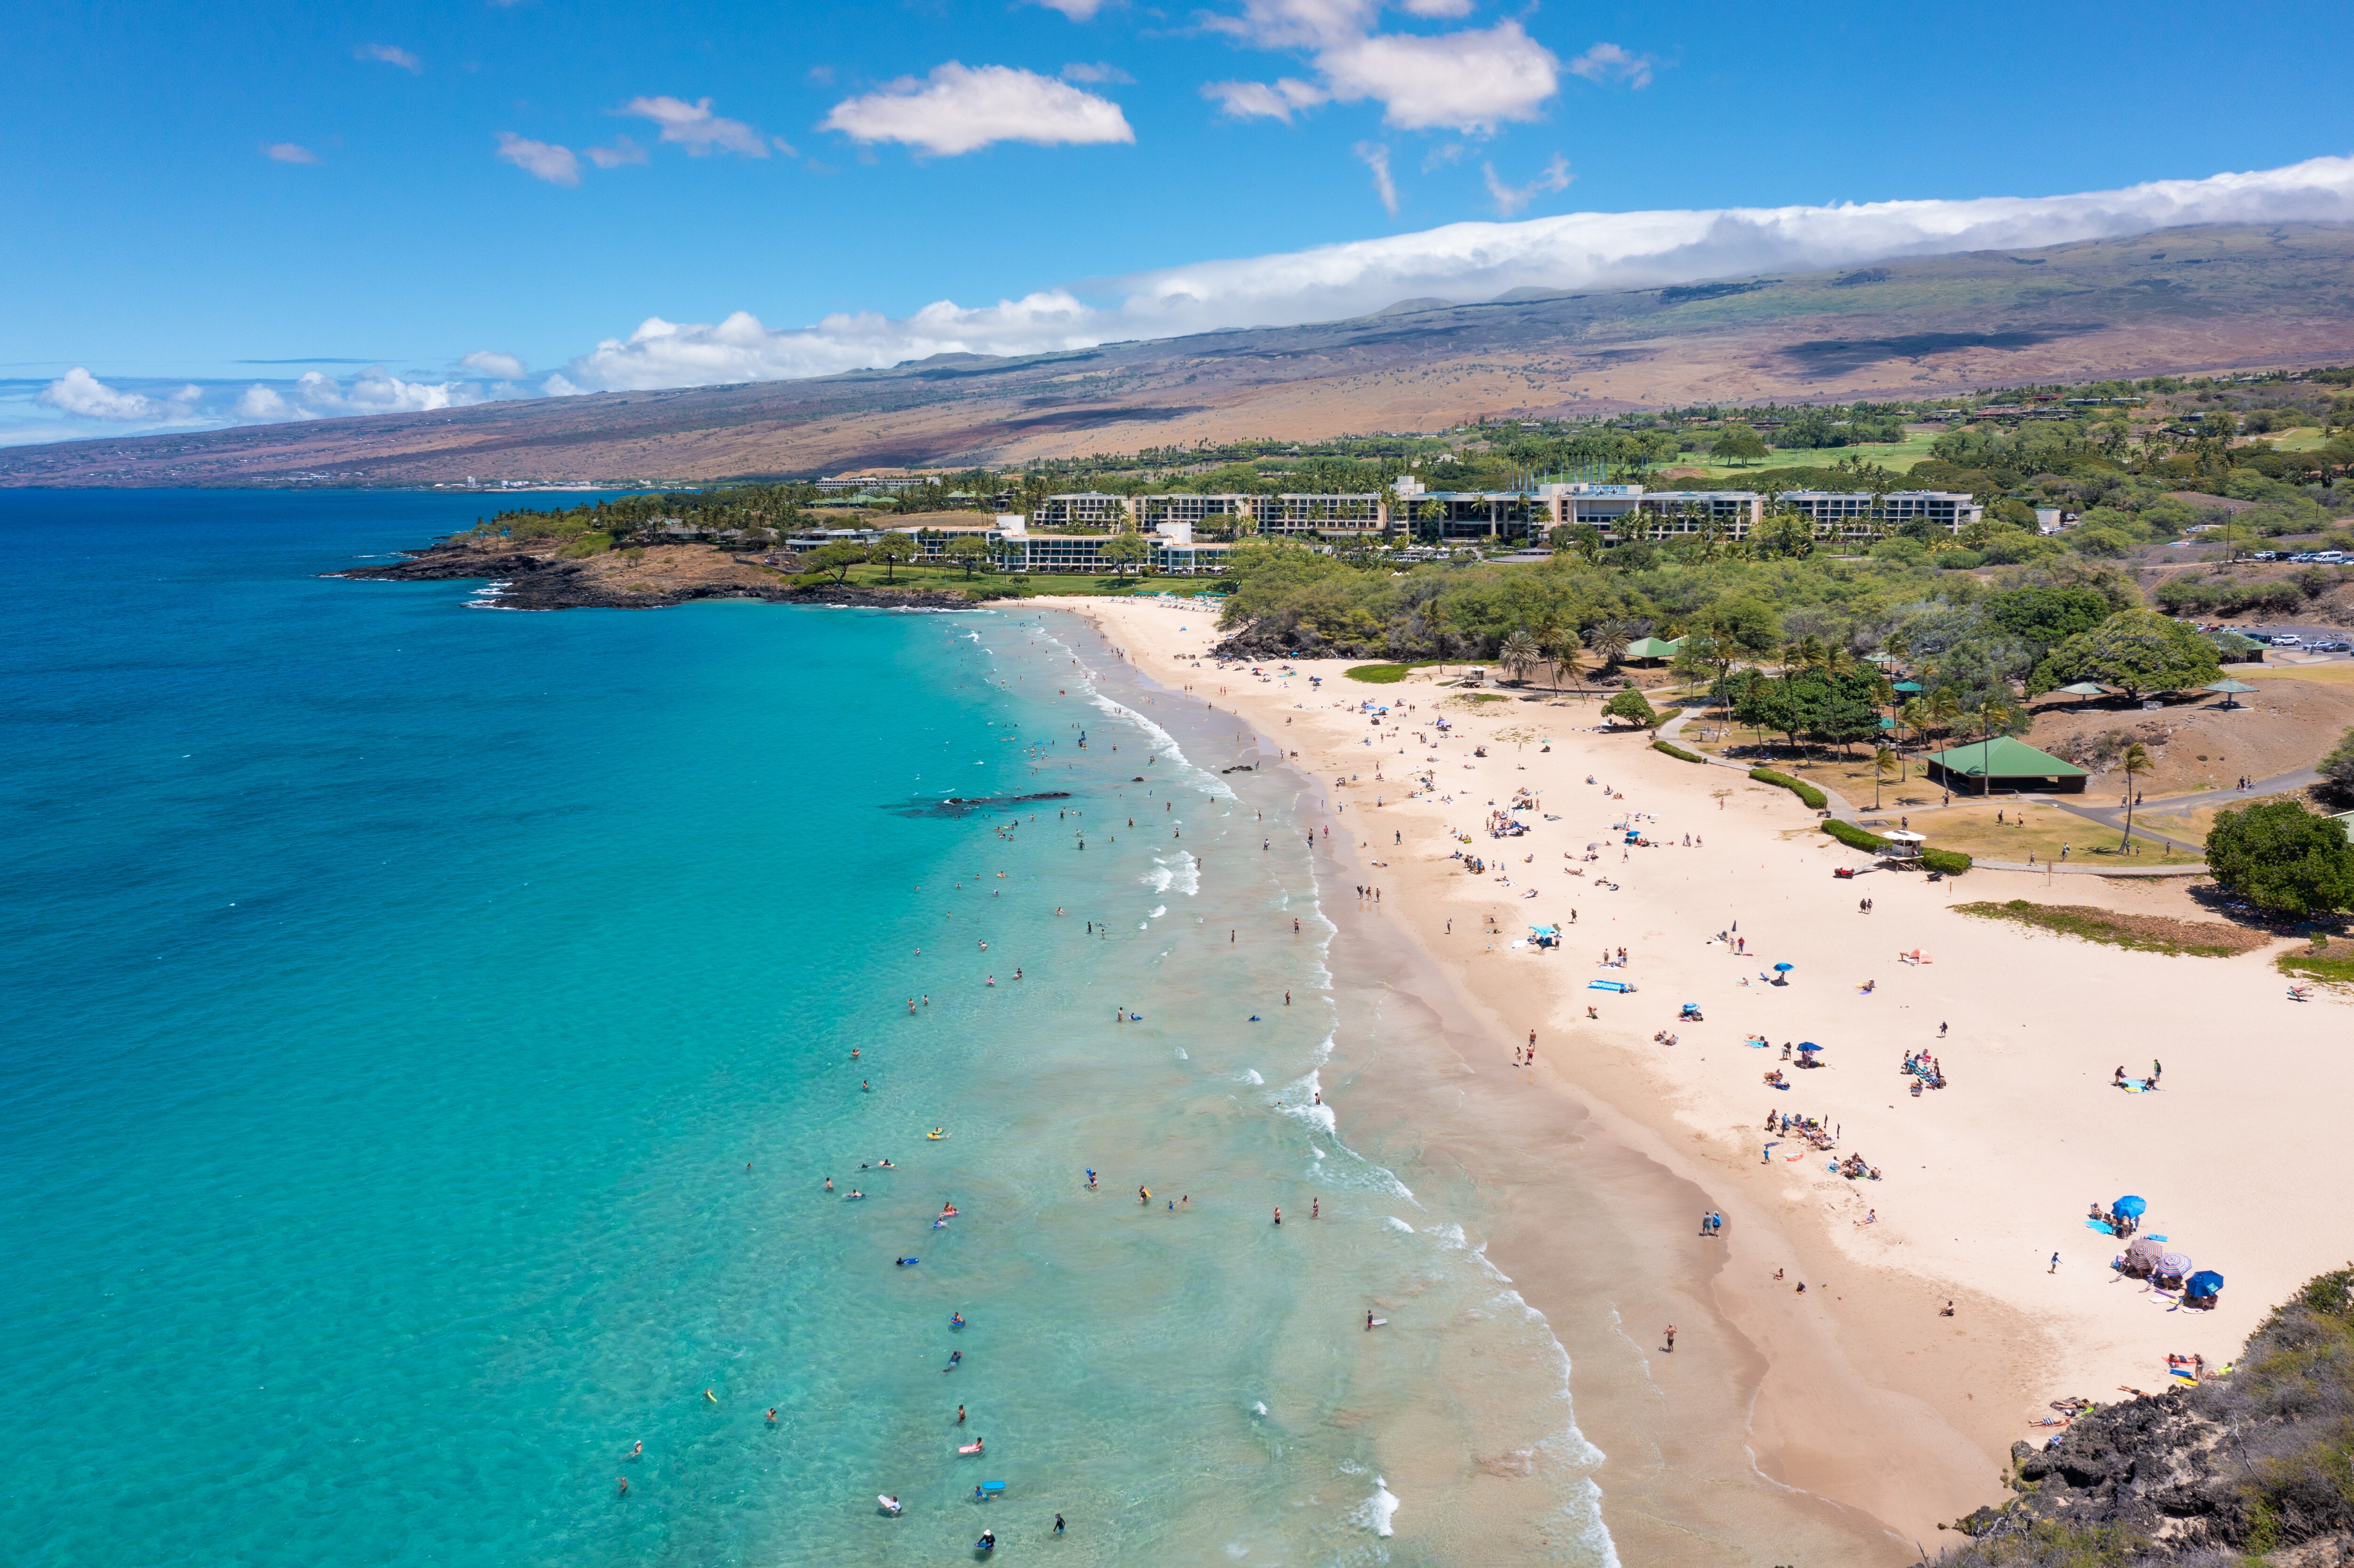 Just minutes away from Hapuna Beach - voted #1 beach in the USA